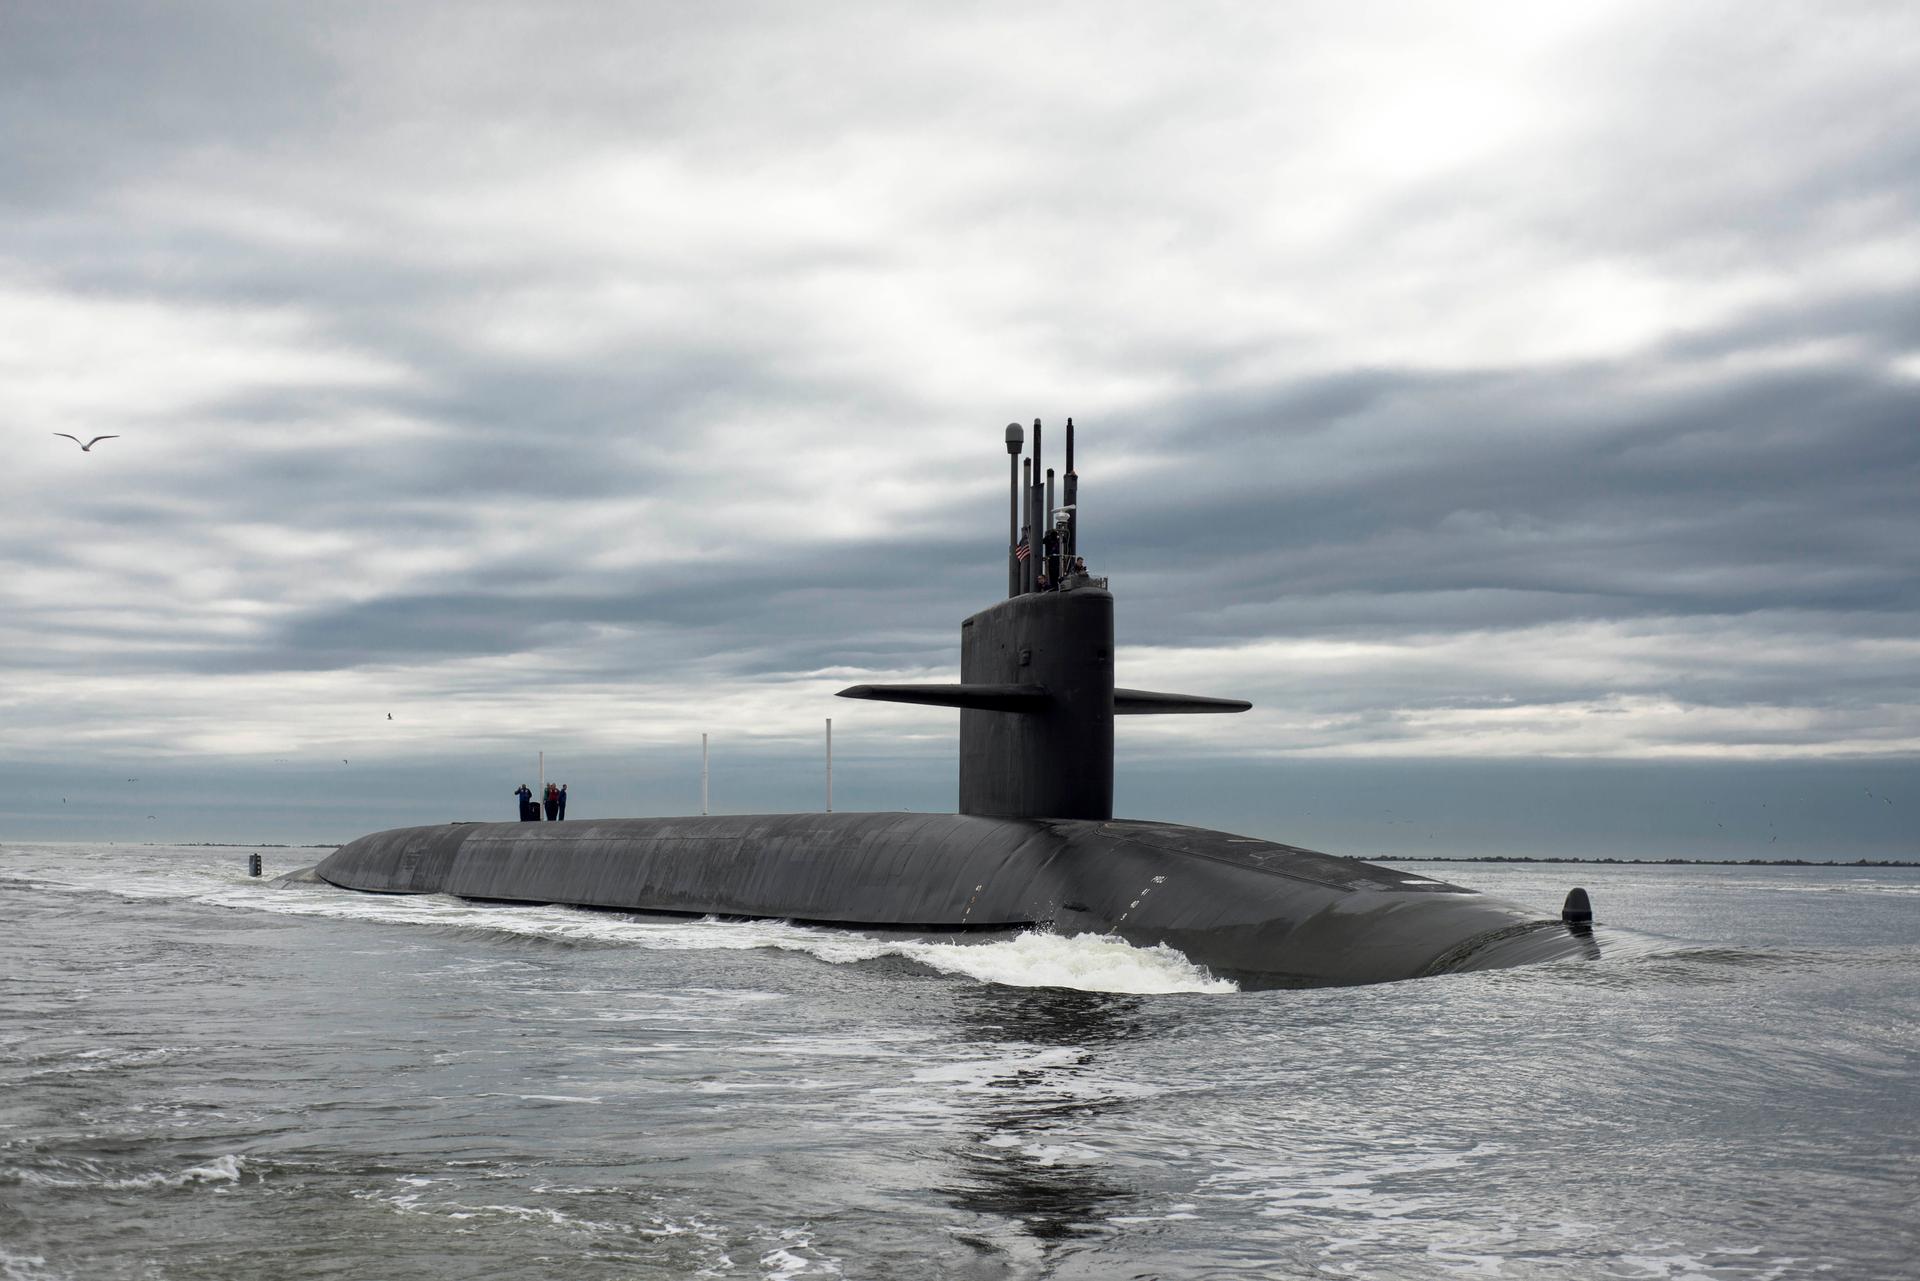 Top of grey submarine sticks out above the water.